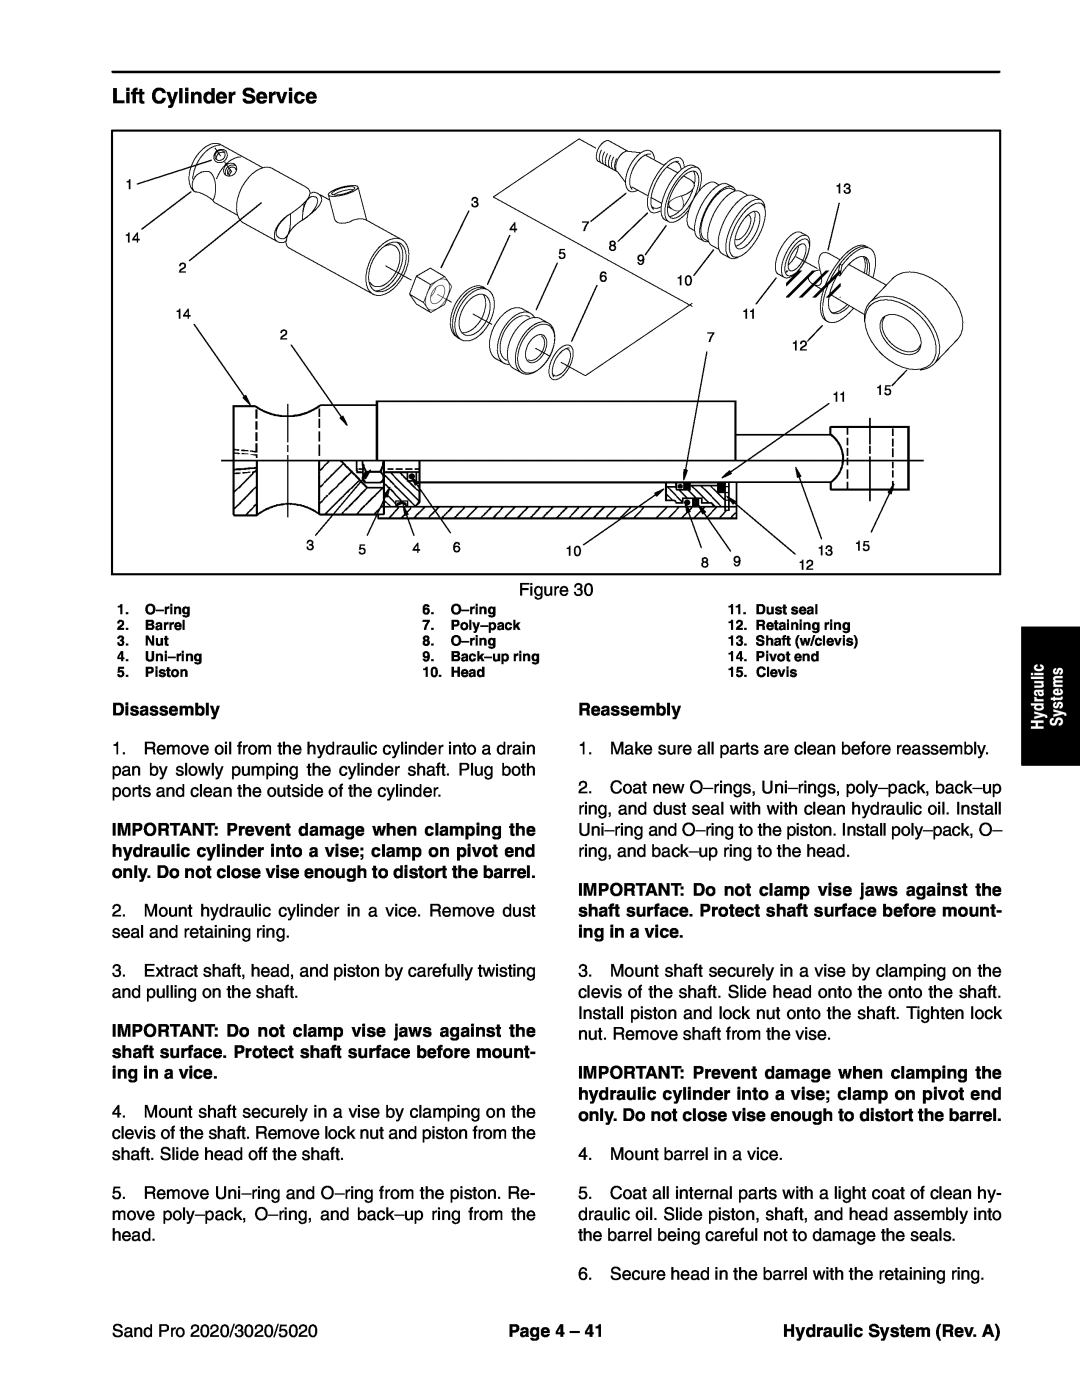 Toro service manual Lift Cylinder Service, Disassembly, Reassembly, Hydraulic, Systems, Sand Pro 2020/3020/5020, Page 4 